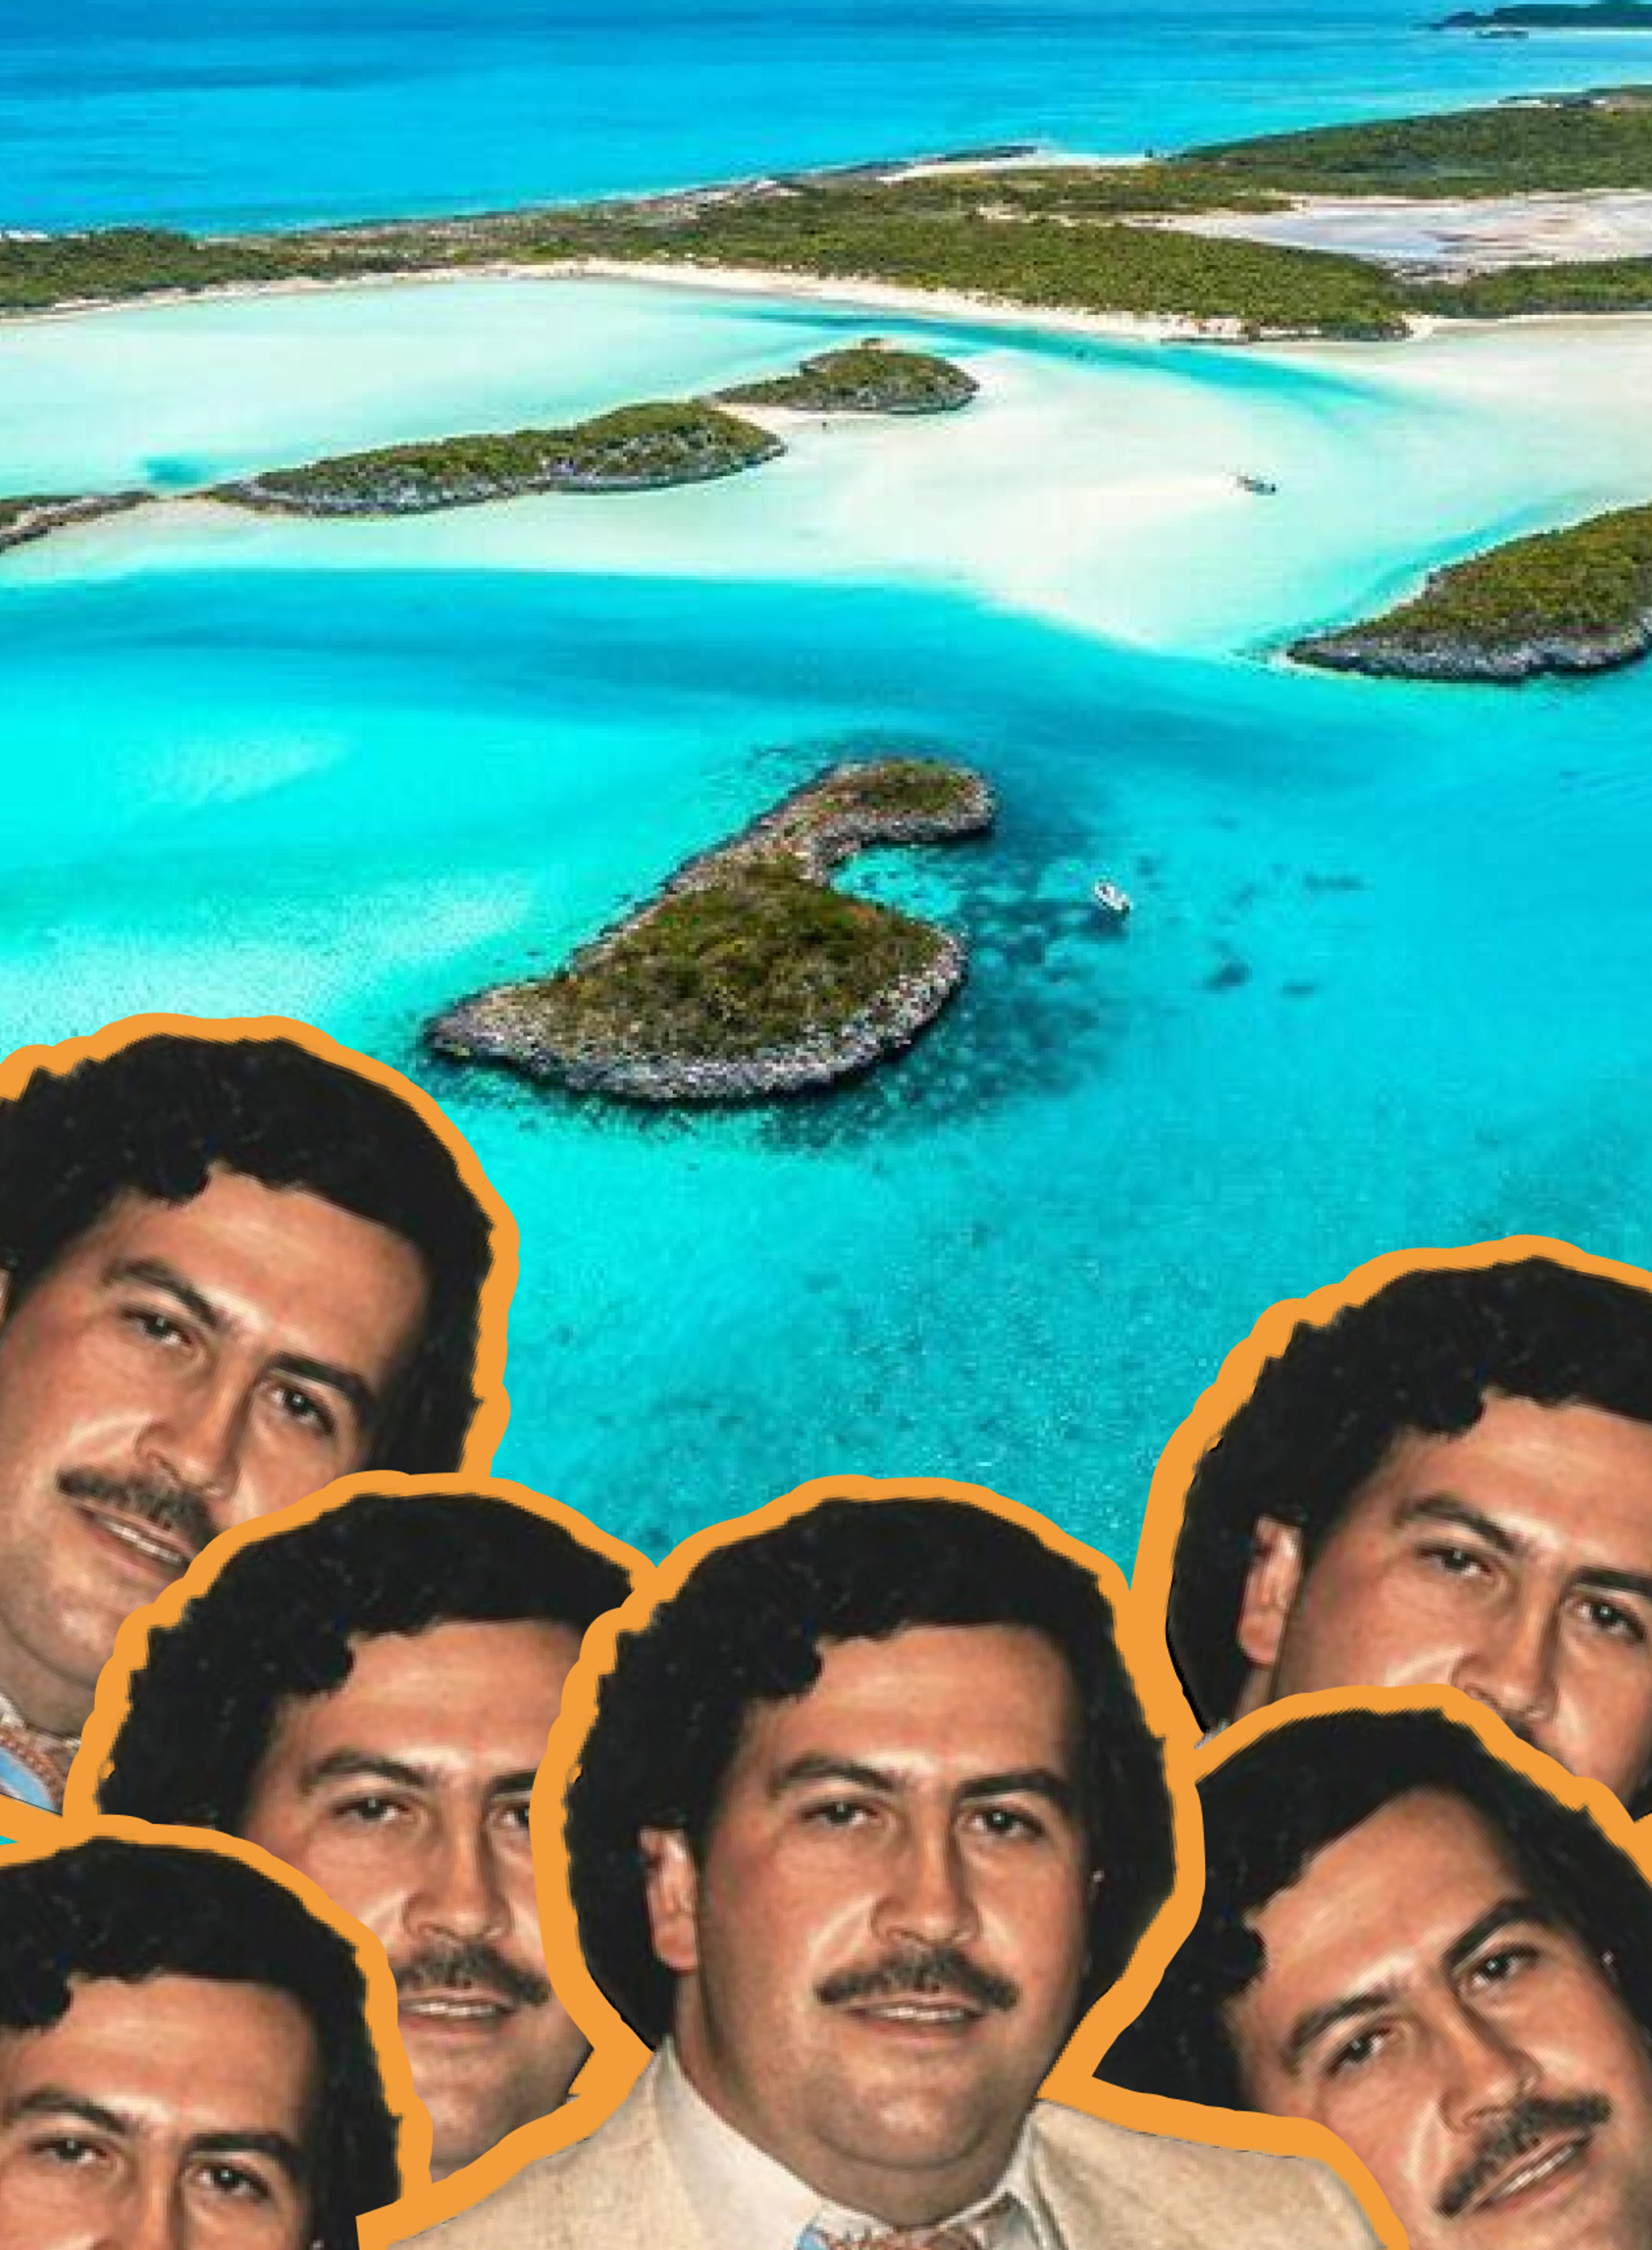 An island fit for a drug lord.